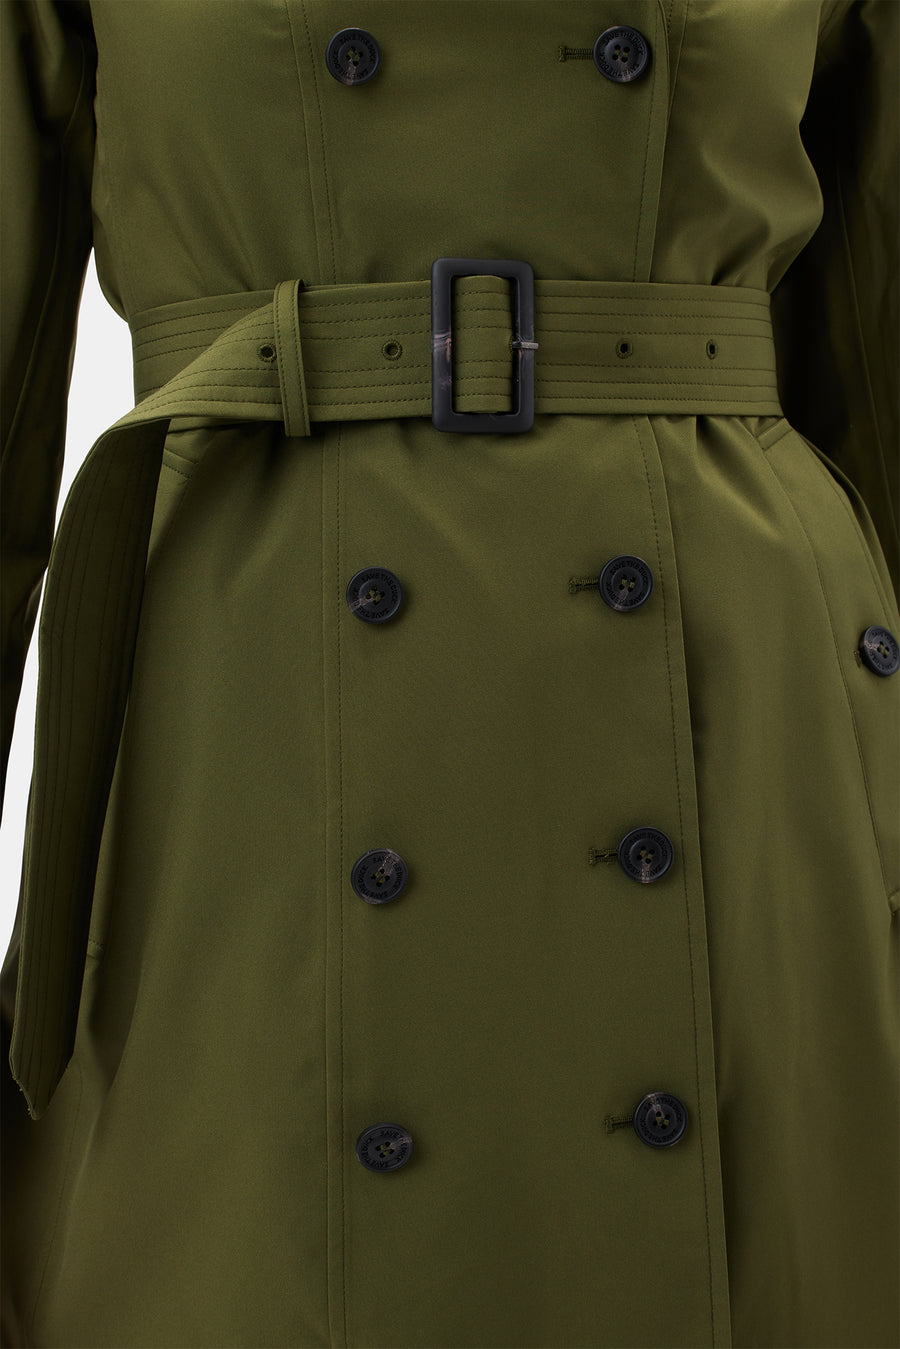 Save the Duck Audrey Raincoat - Dusty Olive